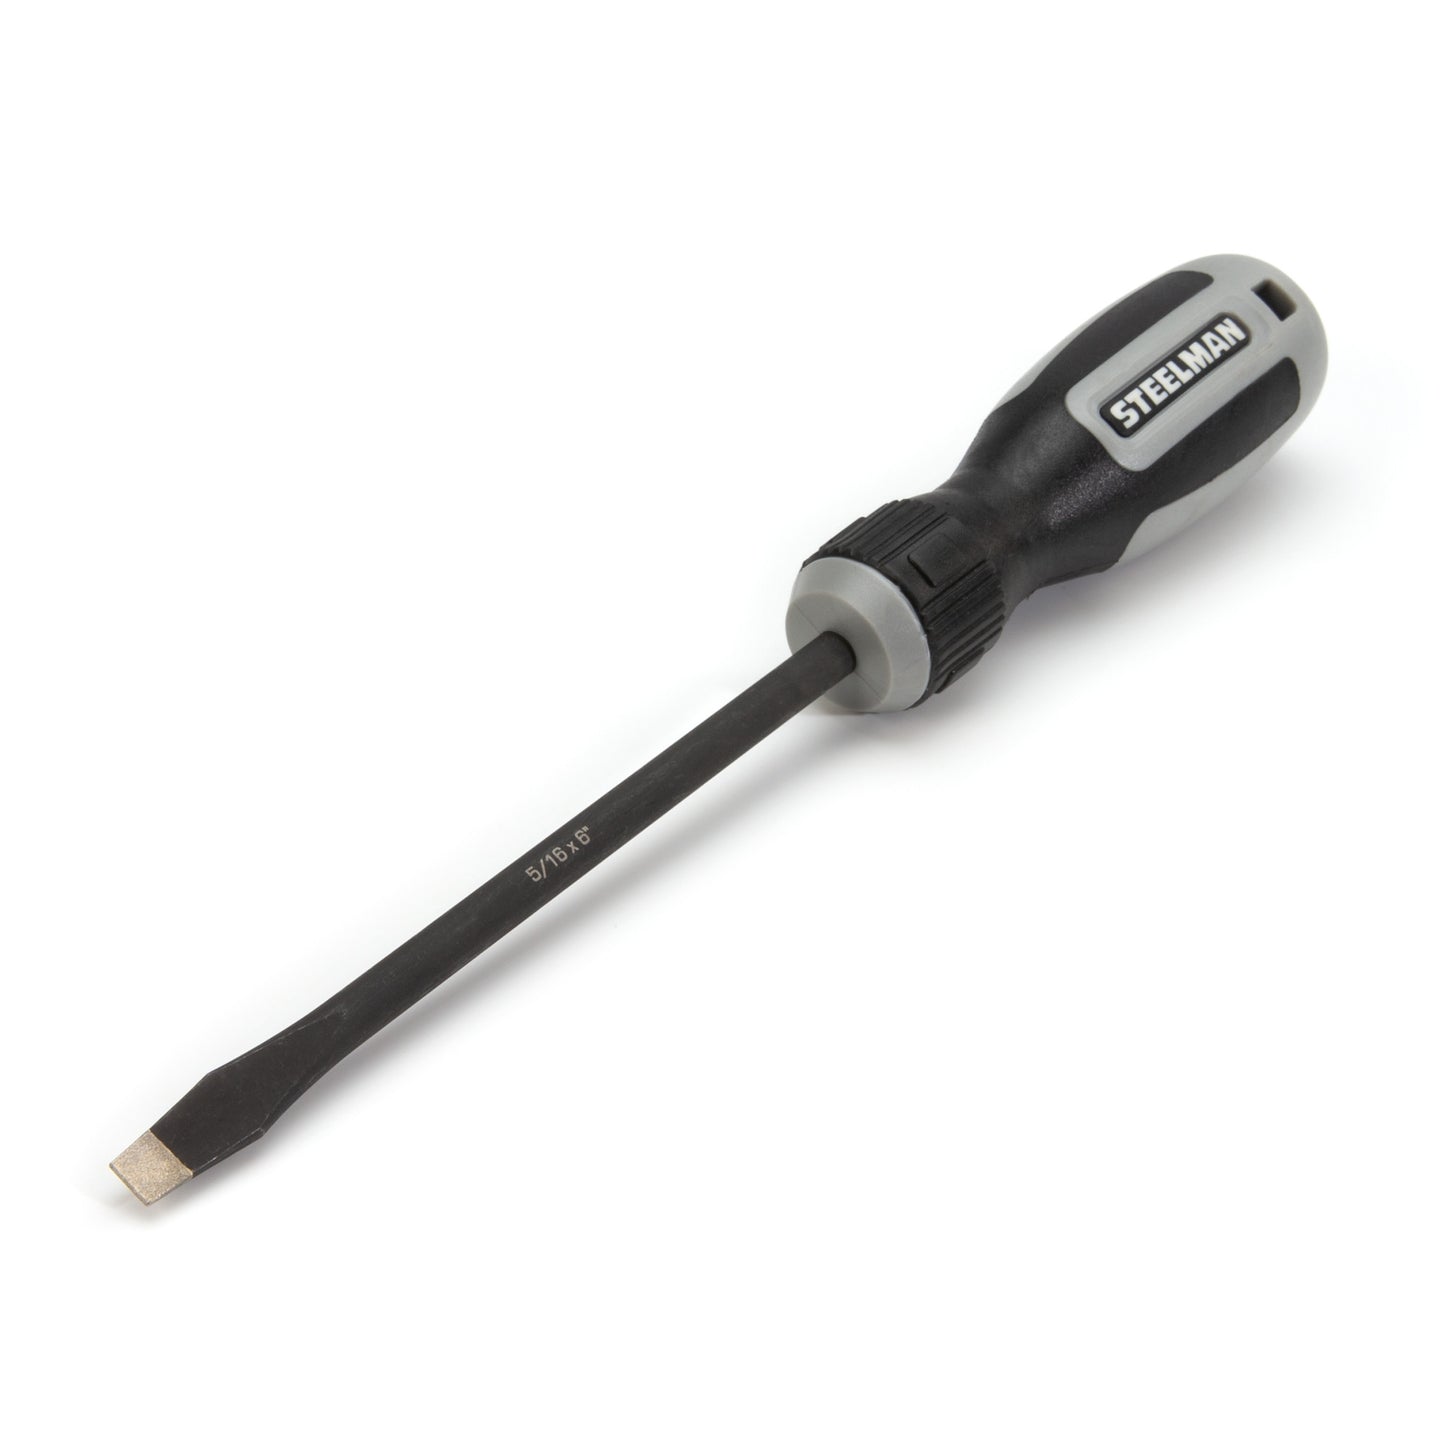 Slotted Diamond Tip Screwdriver, 5/16 x 6-Inch